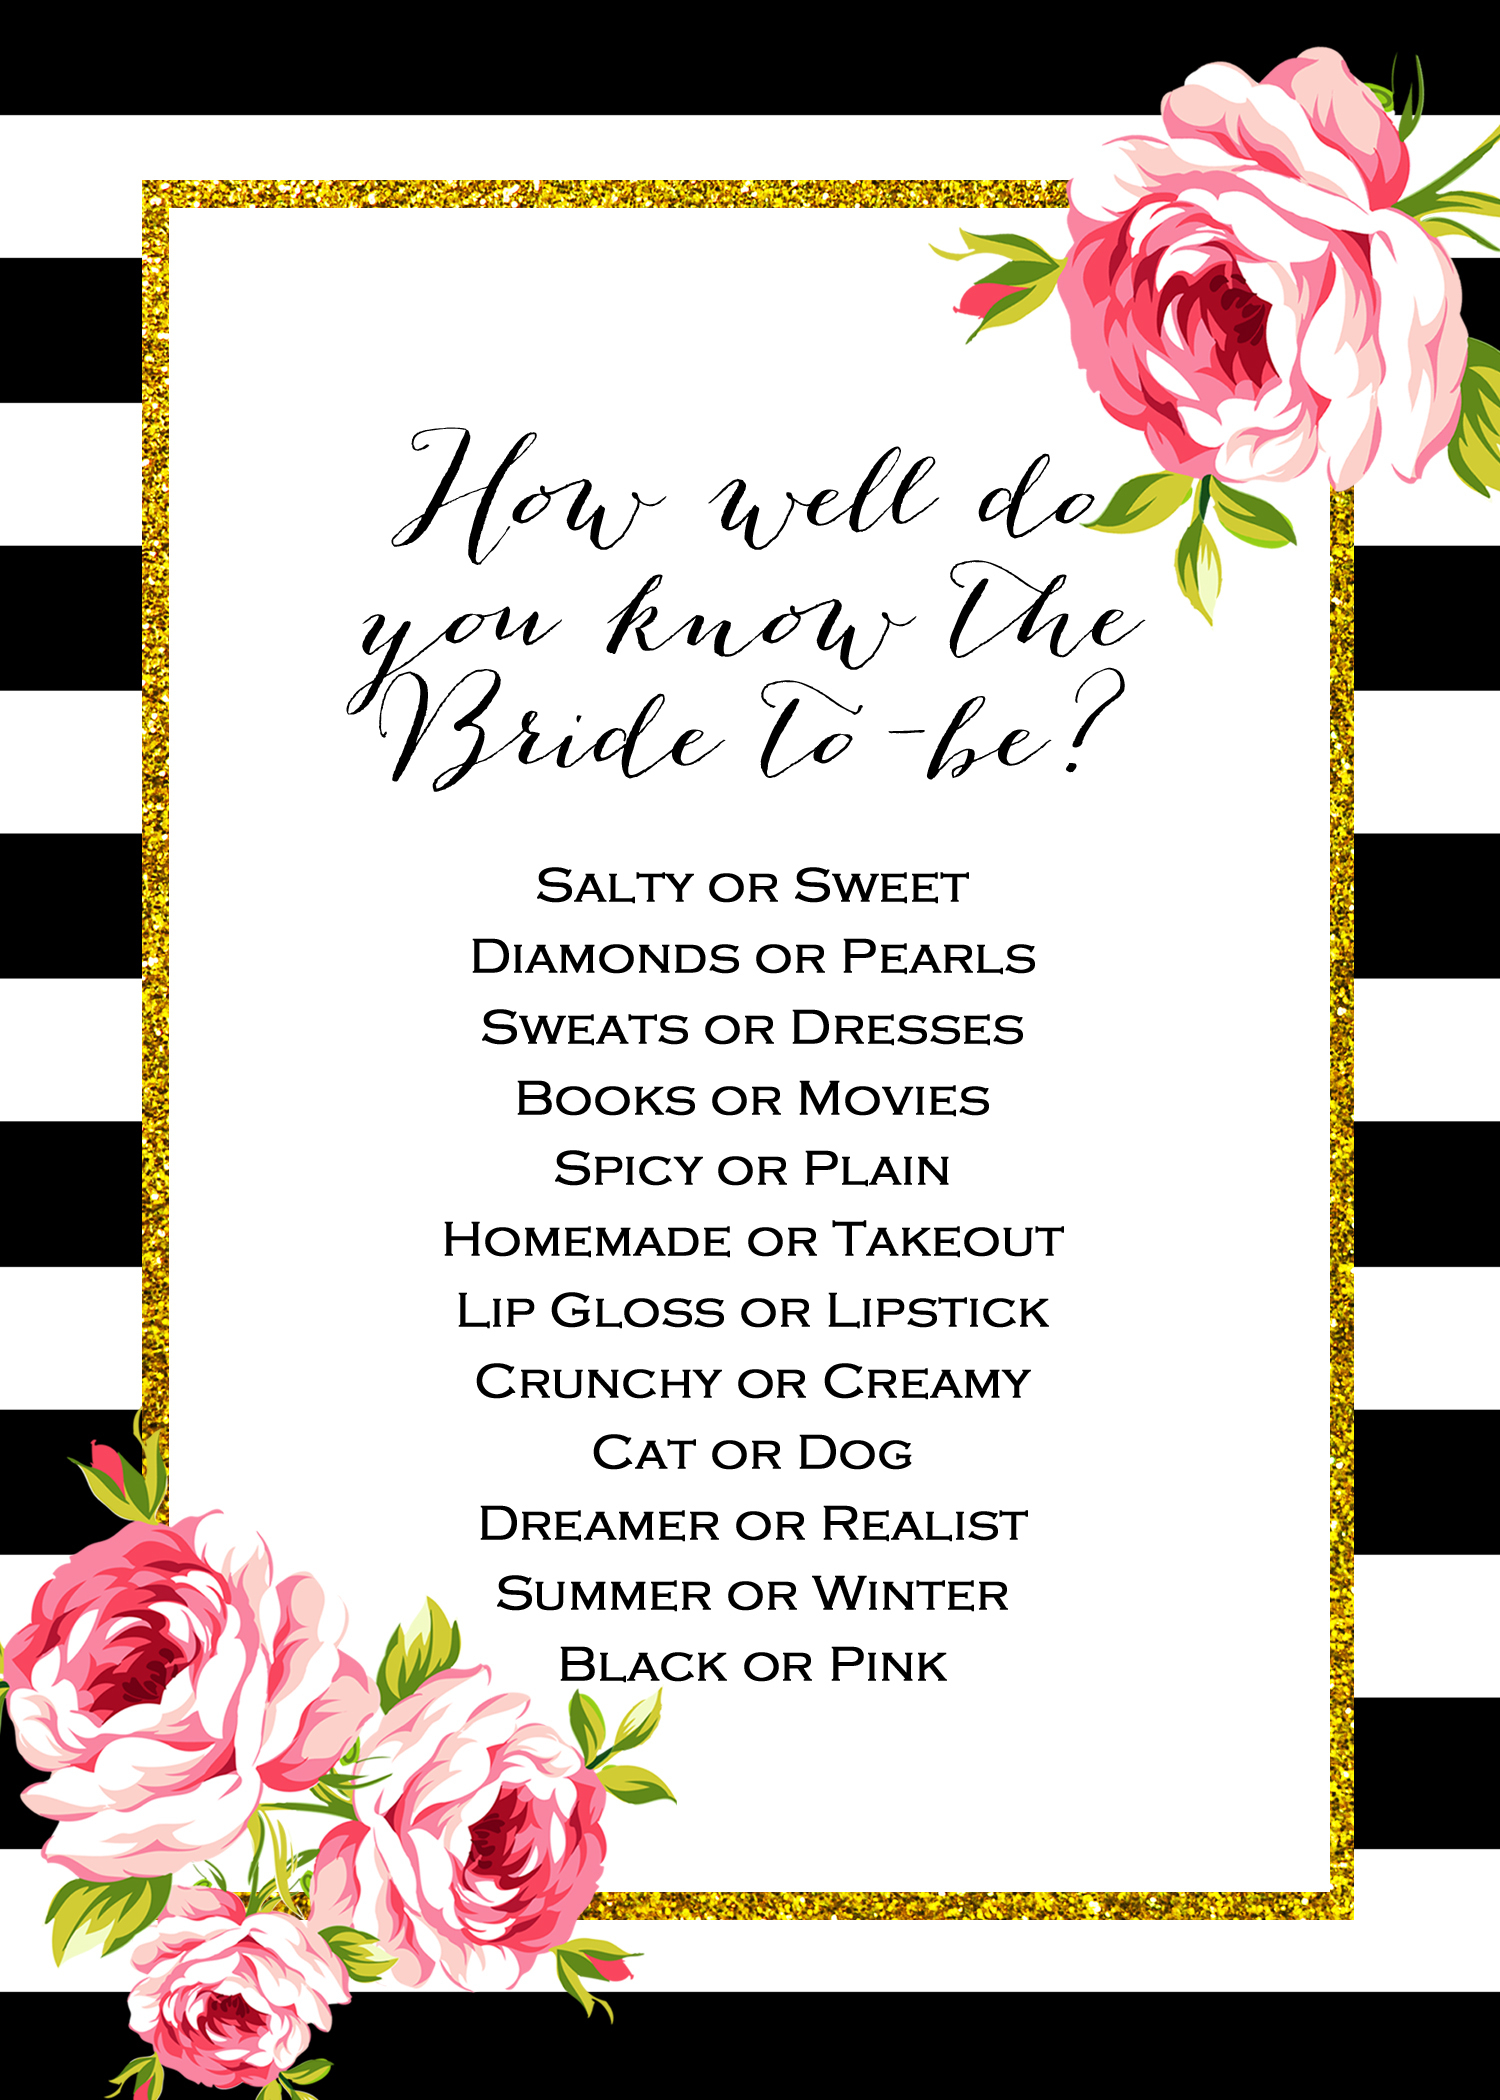 2_Free_Printable_Games Archives - Bridal Shower Ideas - Themes - How Well Does The Bride Know The Groom Free Printable